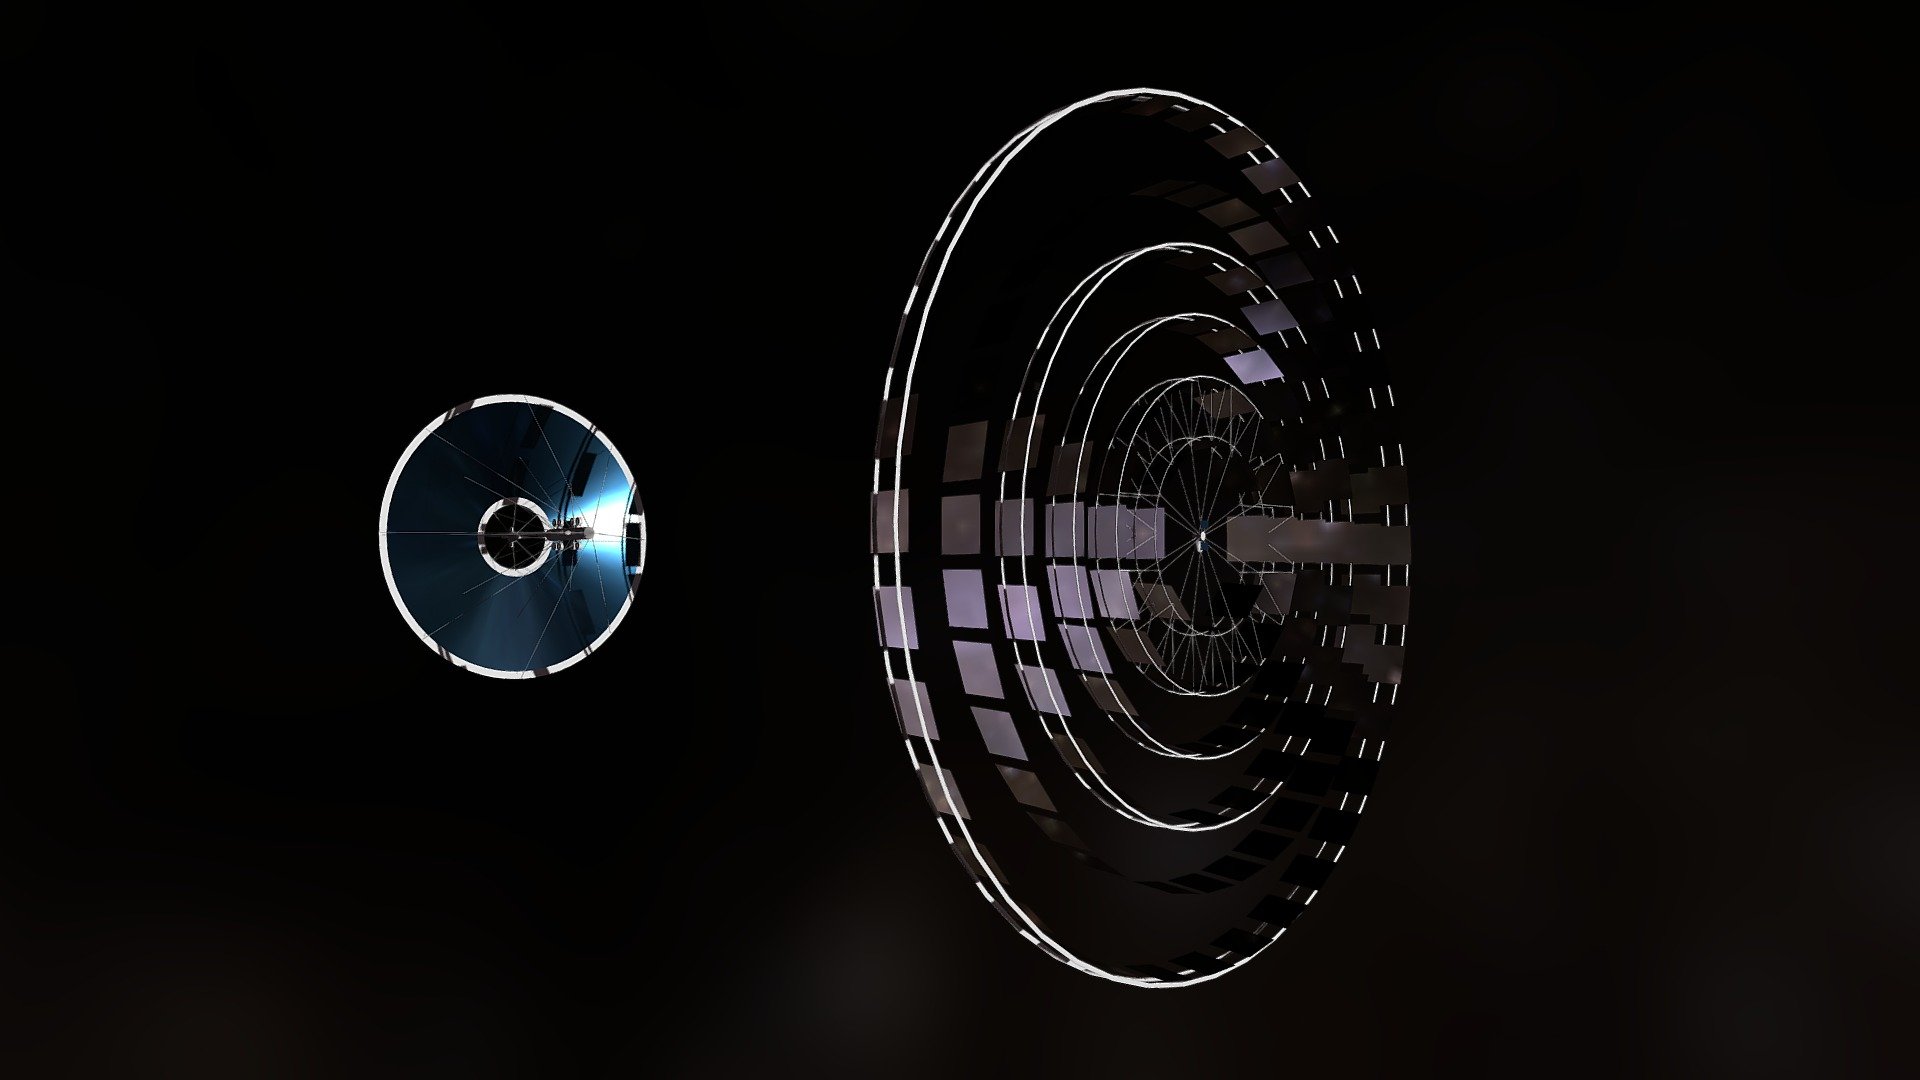 A rough mock-up of the Starglider combined Solar-sail and impulse inertial-drive craft, along with the supporting Phaeton Collector Station. The solar sail on the Starglider also acts as photo-voltaic collector, which then powers banks of impulse reaction wheels along the sides of the craft. The Phaeton maintains station in orbit around the Sun and beams sunlight to power the Starglider with its massive array of collector mirrors when the Starglider passes somewhere outside the orbit of Mars 3d model